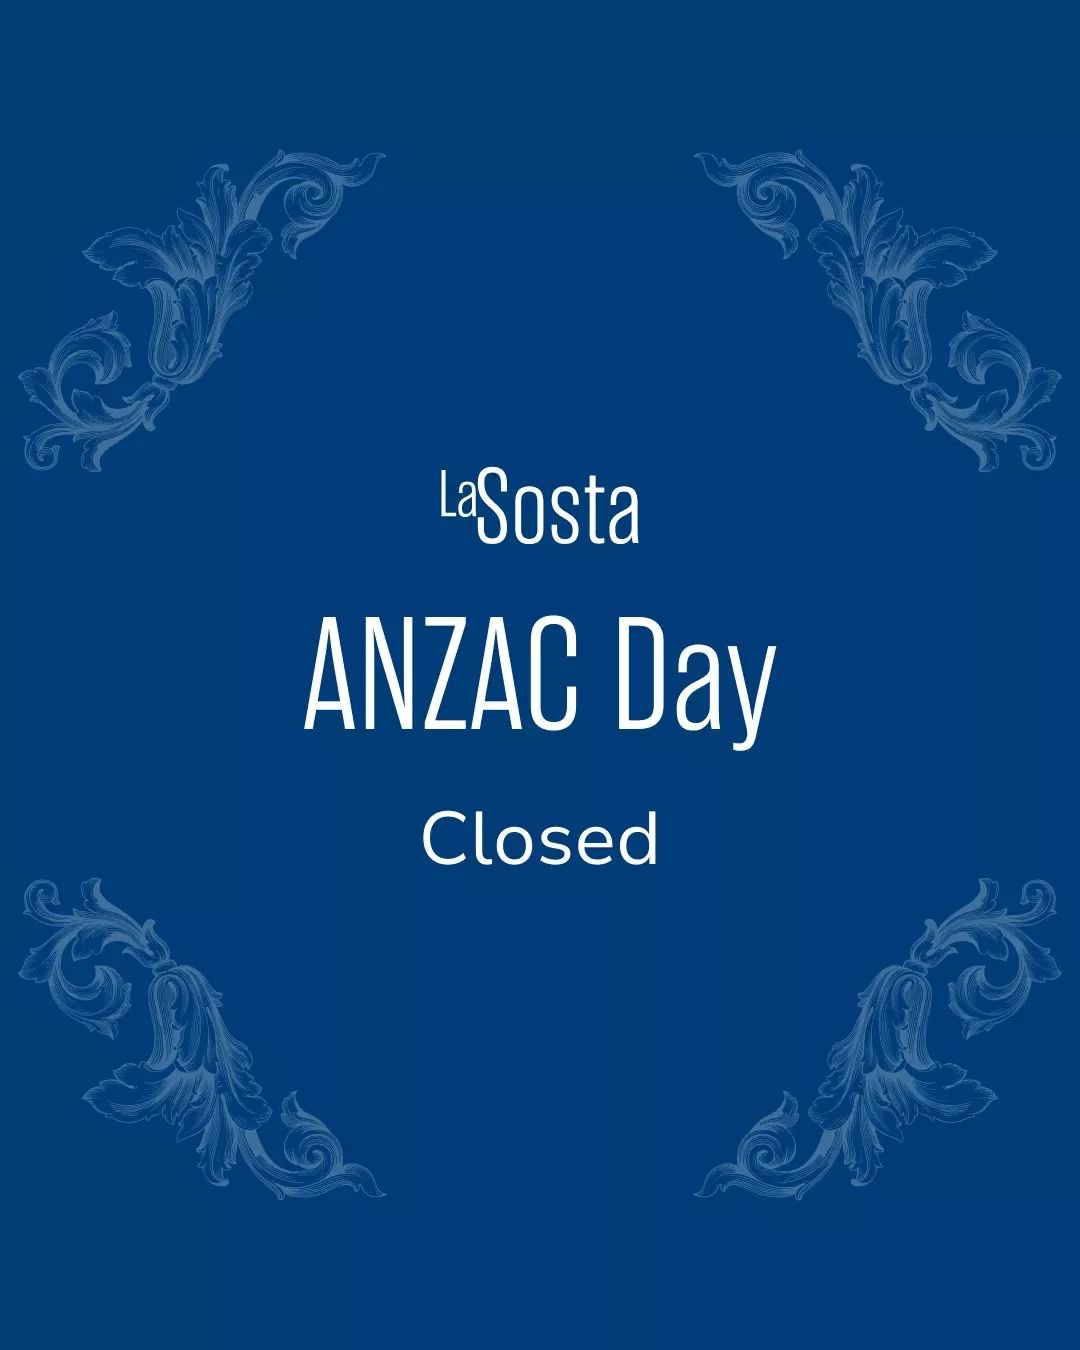 La Sosta will be closed on Thursday for the public holiday.